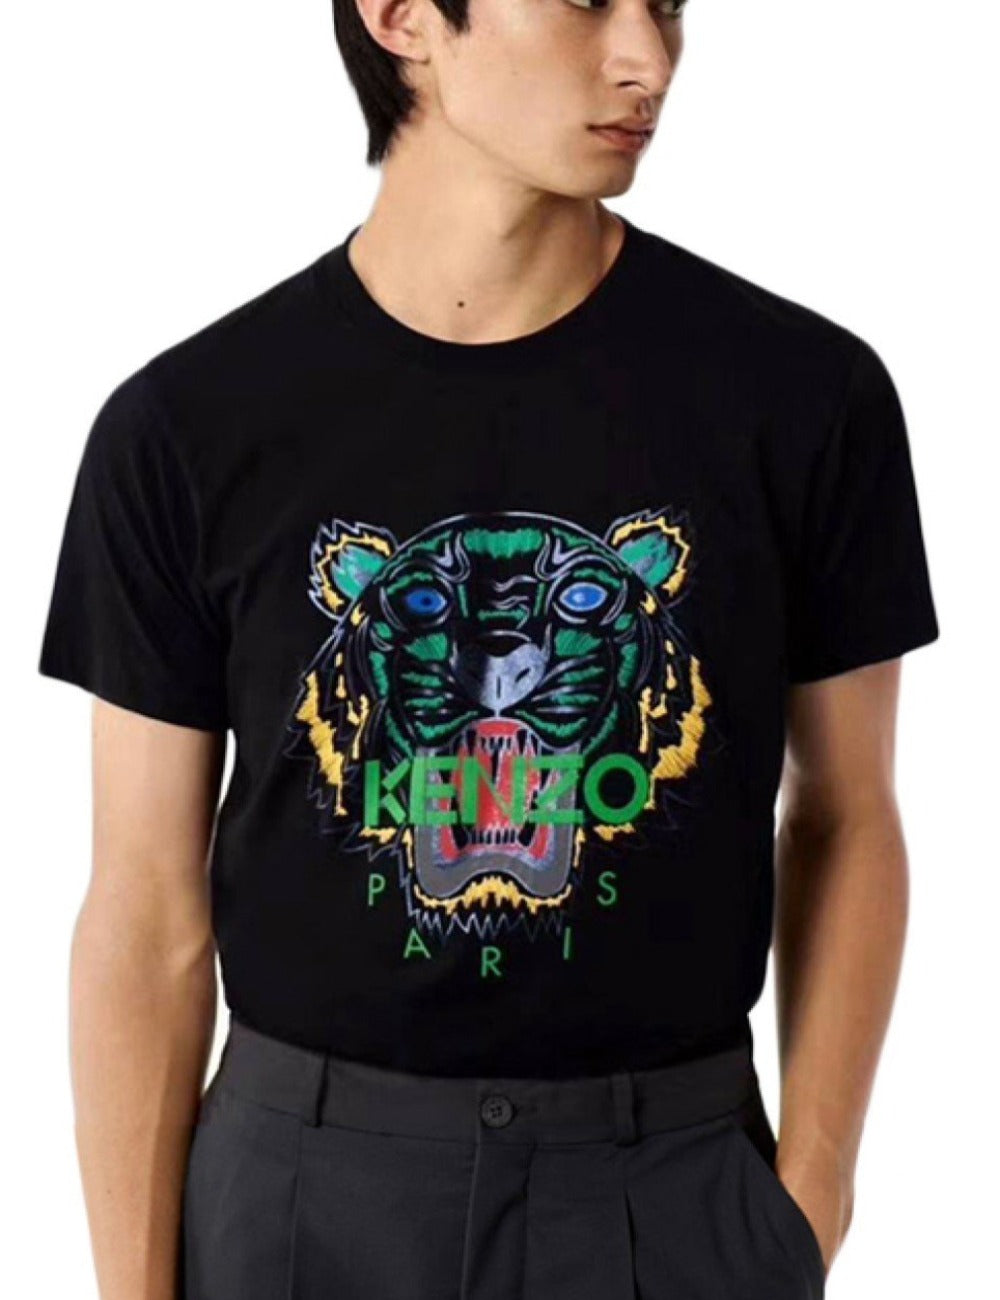 Kenzo Yellow Green Tiger Logo T-Shirt - Shop Streetwear, Sneakers, Slippers and Gifts online | Malaysia - The Factory KL